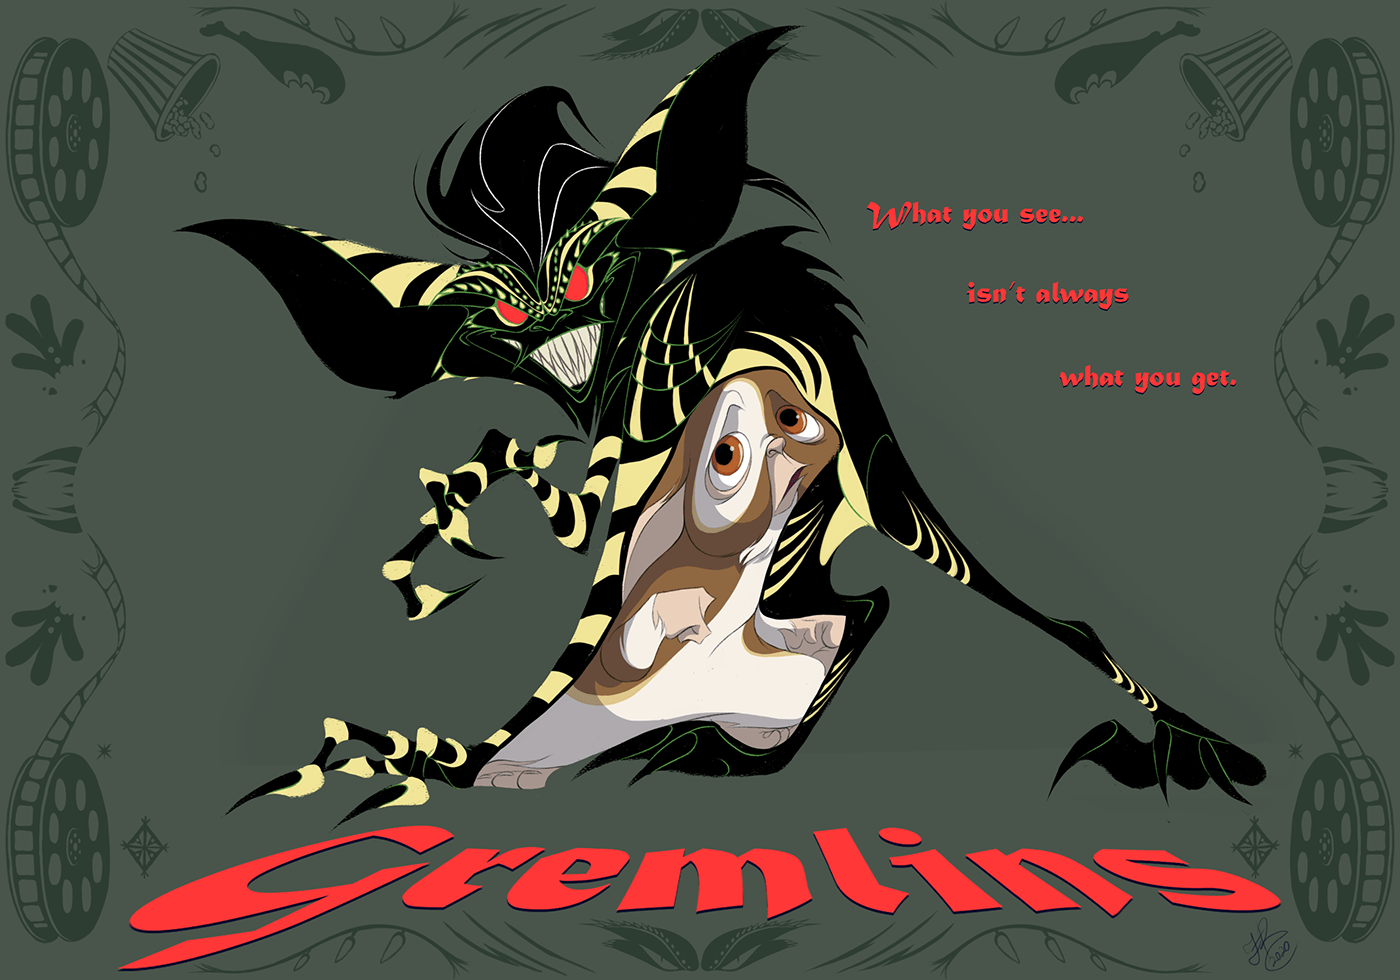 A digital art piece of a movie poster for "Gremlins."